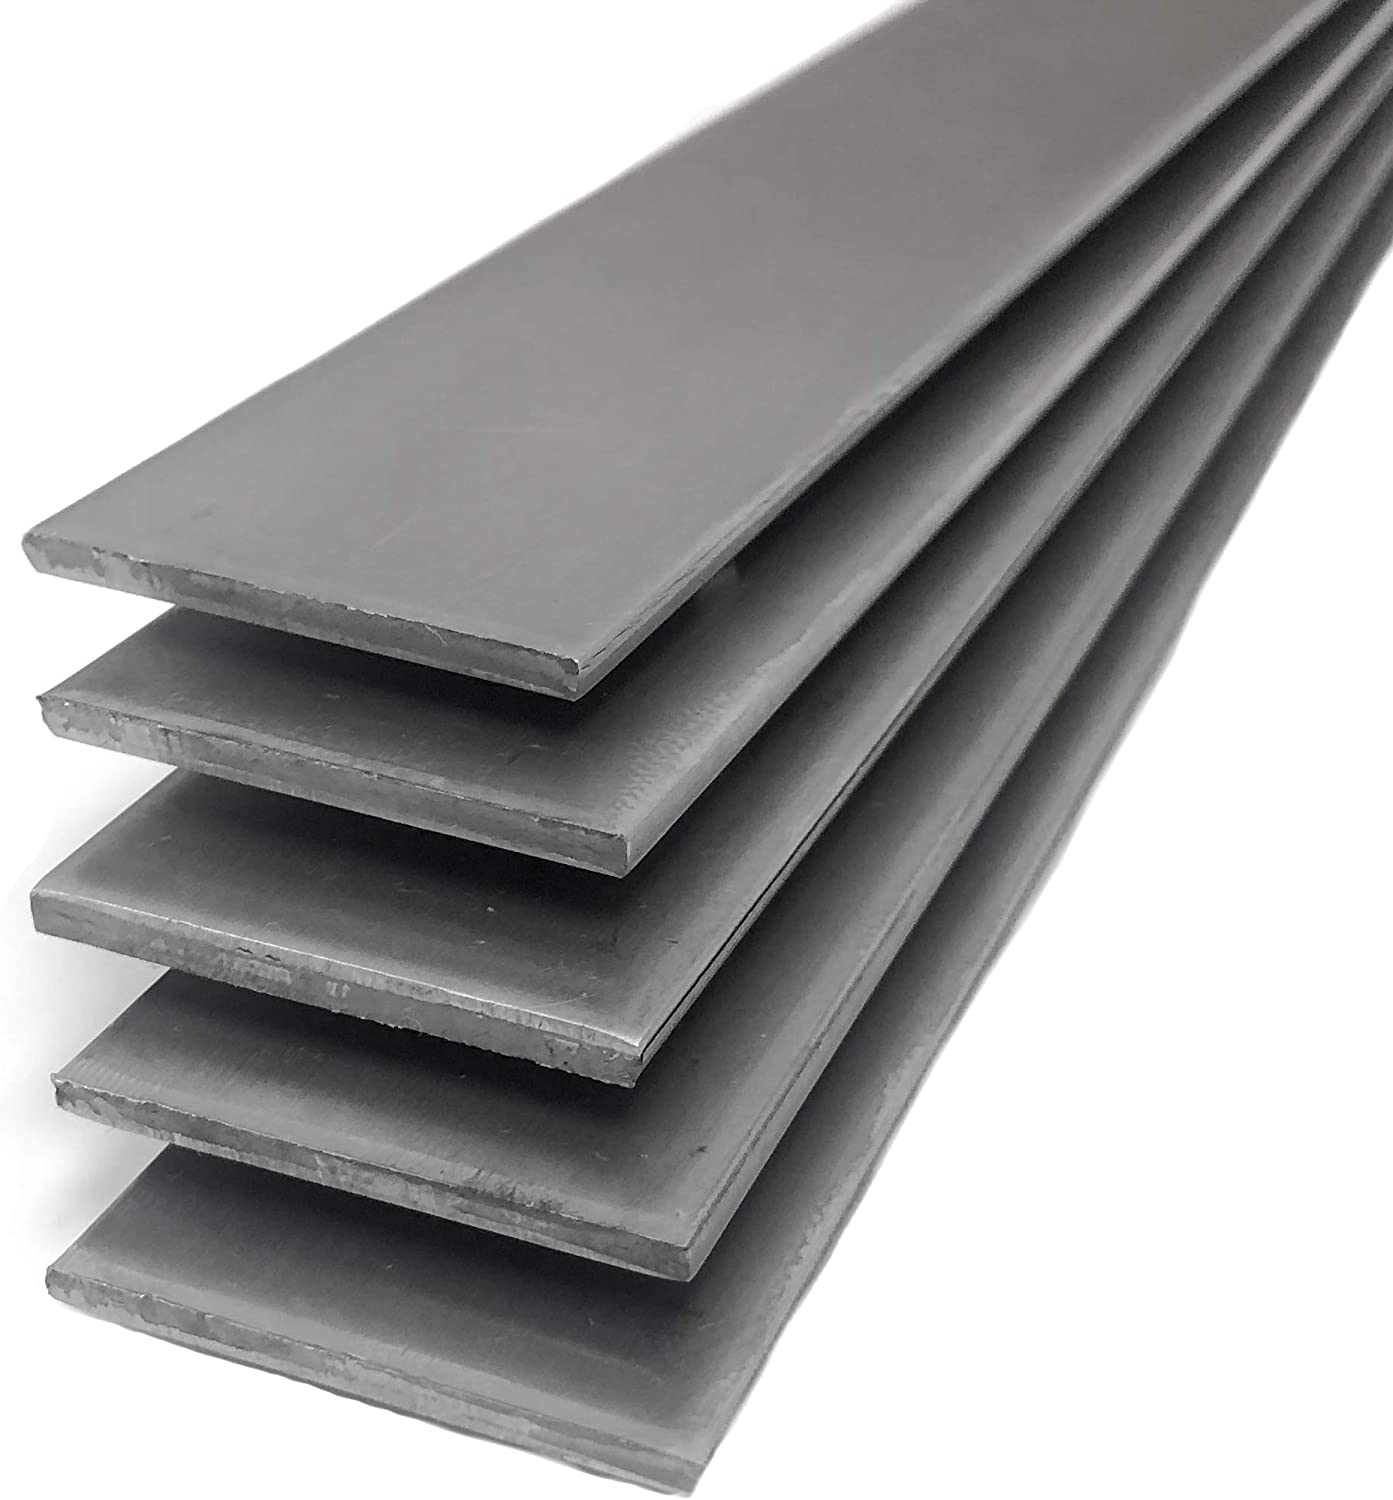 Hot Rolled Flat Steel Origin In China Flat Steel Other Products Stainless Bar Flat Bar Steel with Hot Rolled Flat Steel for Sale